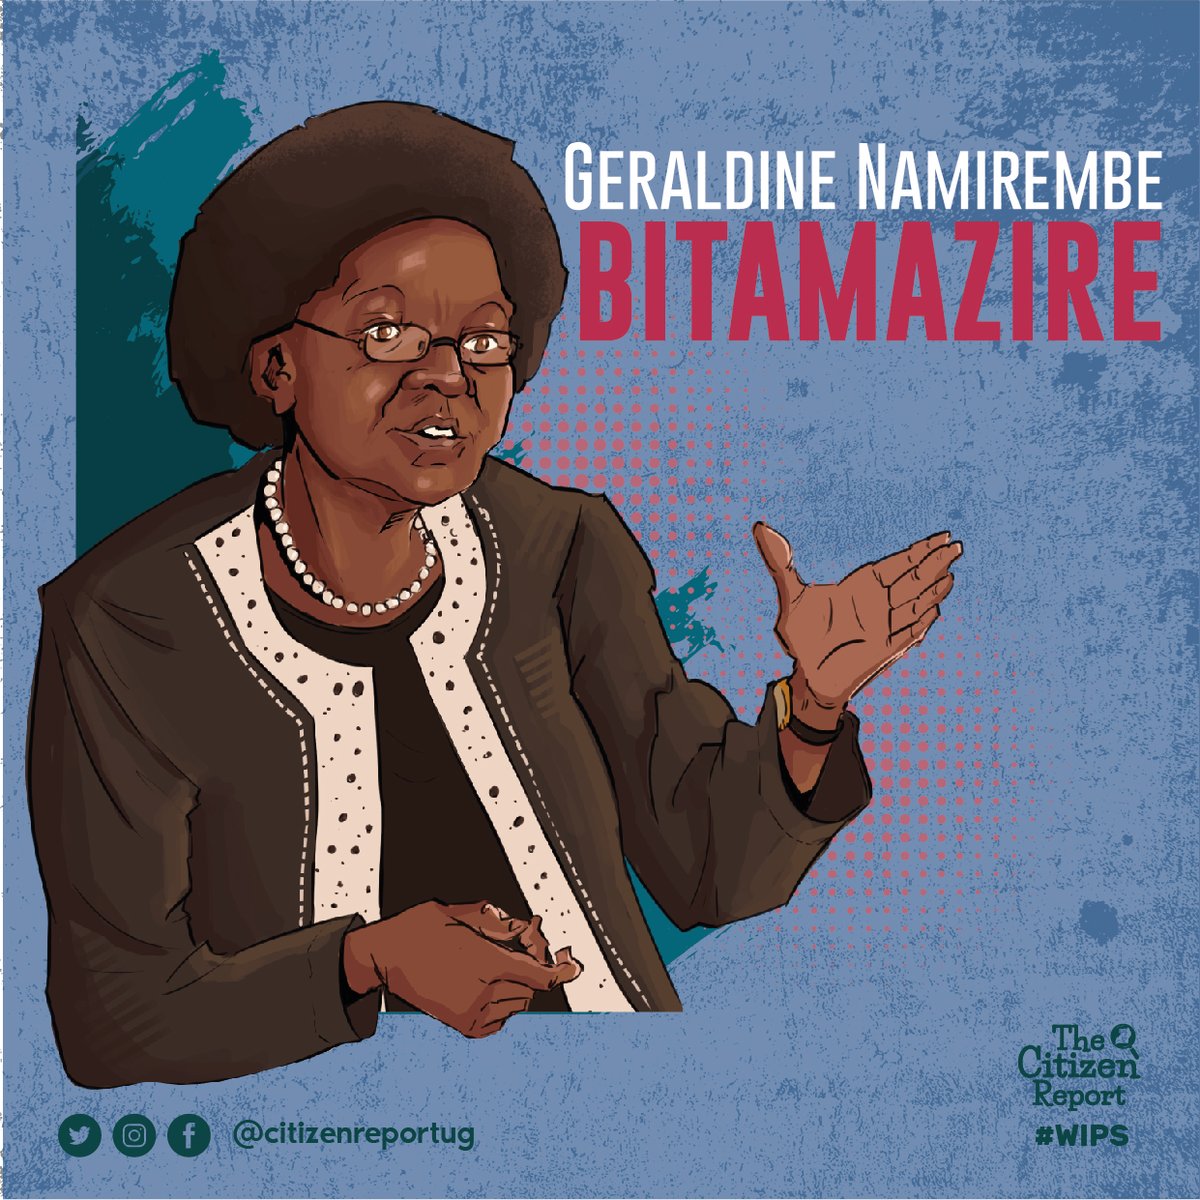 Geraldine Namirembe Bitamazire was born in 1941 in Butambala District. She studied at Trinity College Nabbingo, got a Diploma in Education in 1964, a Bachelor of Arts, and a Master's Degree in Education Management, from Makerere University in 1967 and 1987, respectively. She